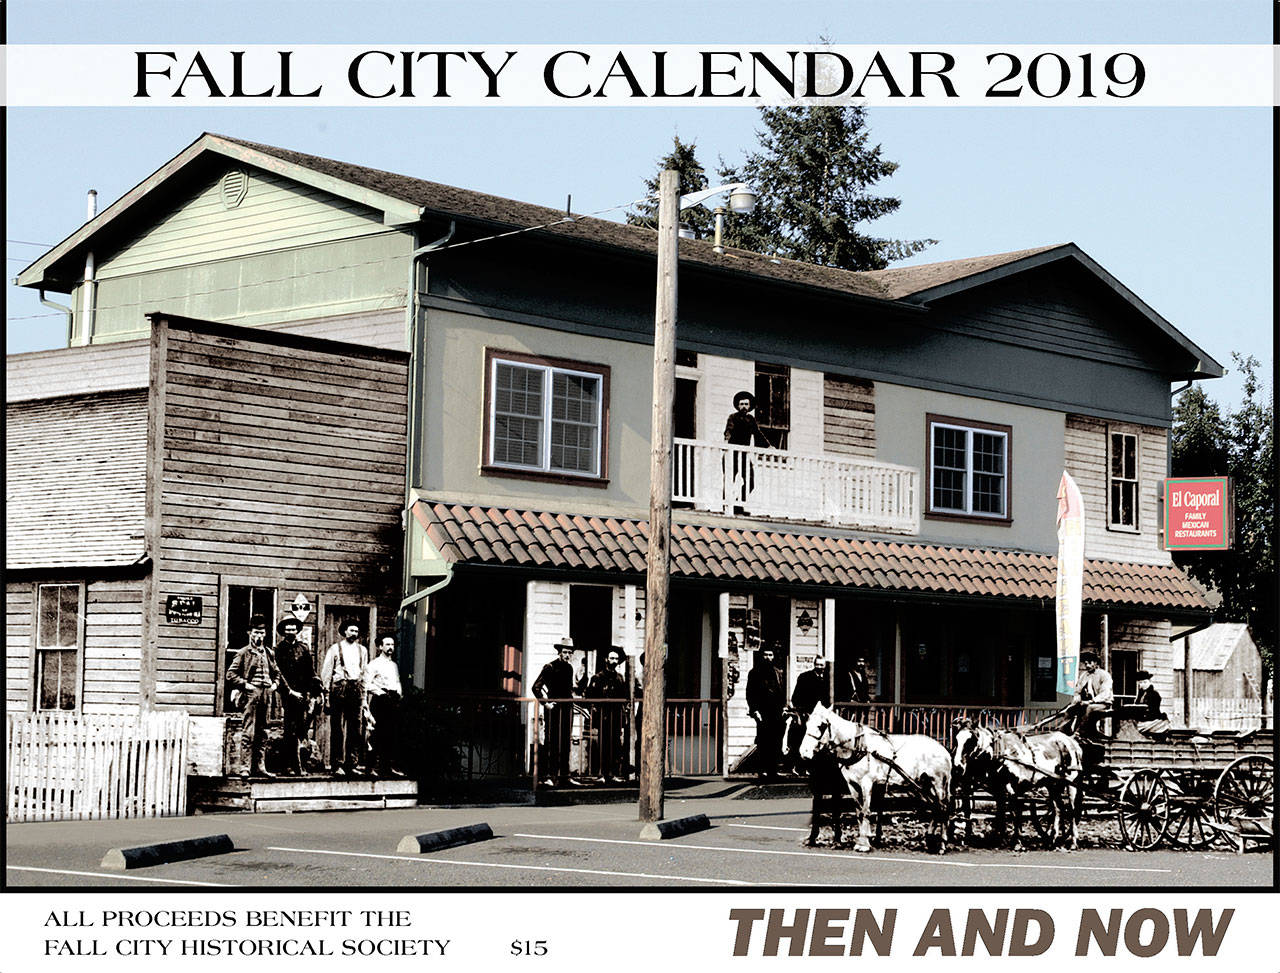 Fall City Historical Society’s 2019 Calendar theme is Then and Now. Courtesy Image